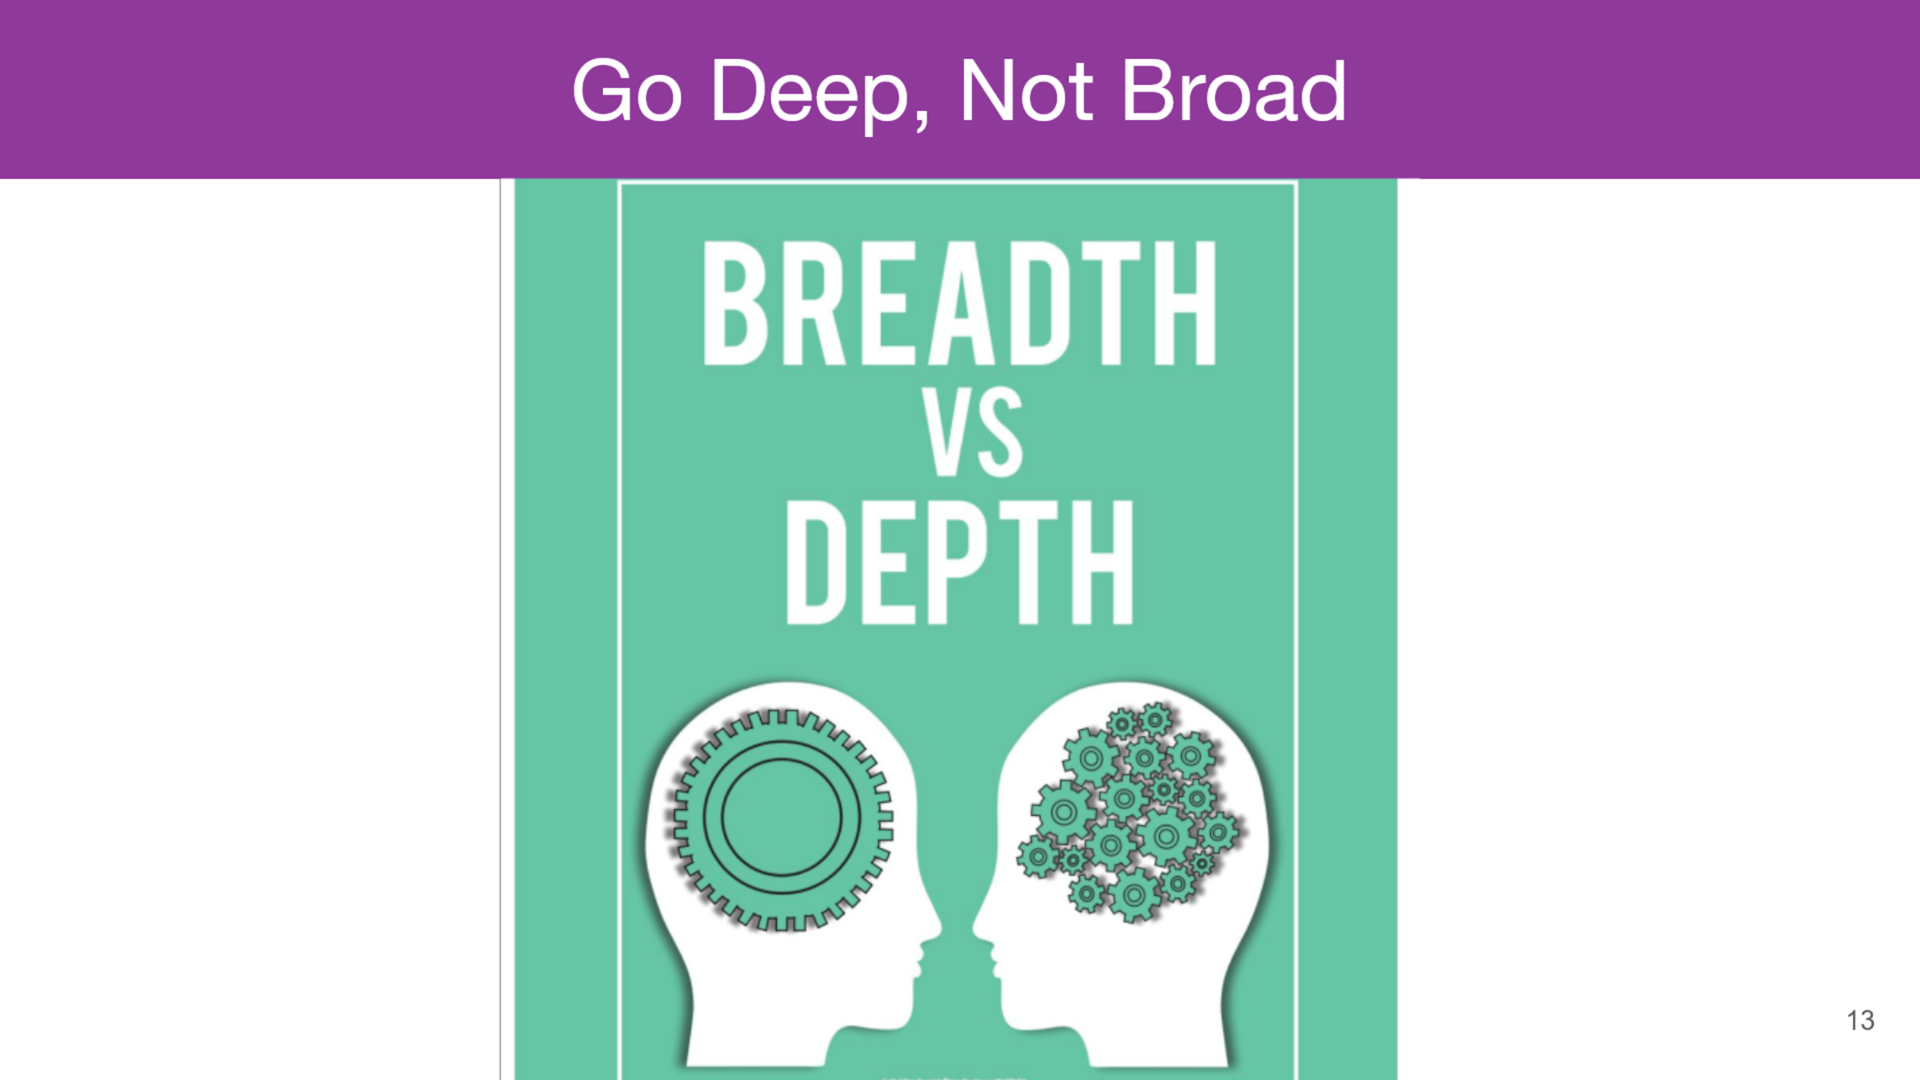 How To Be An Effective Tech Lead [Part 4] - Go Deep, Not Broad